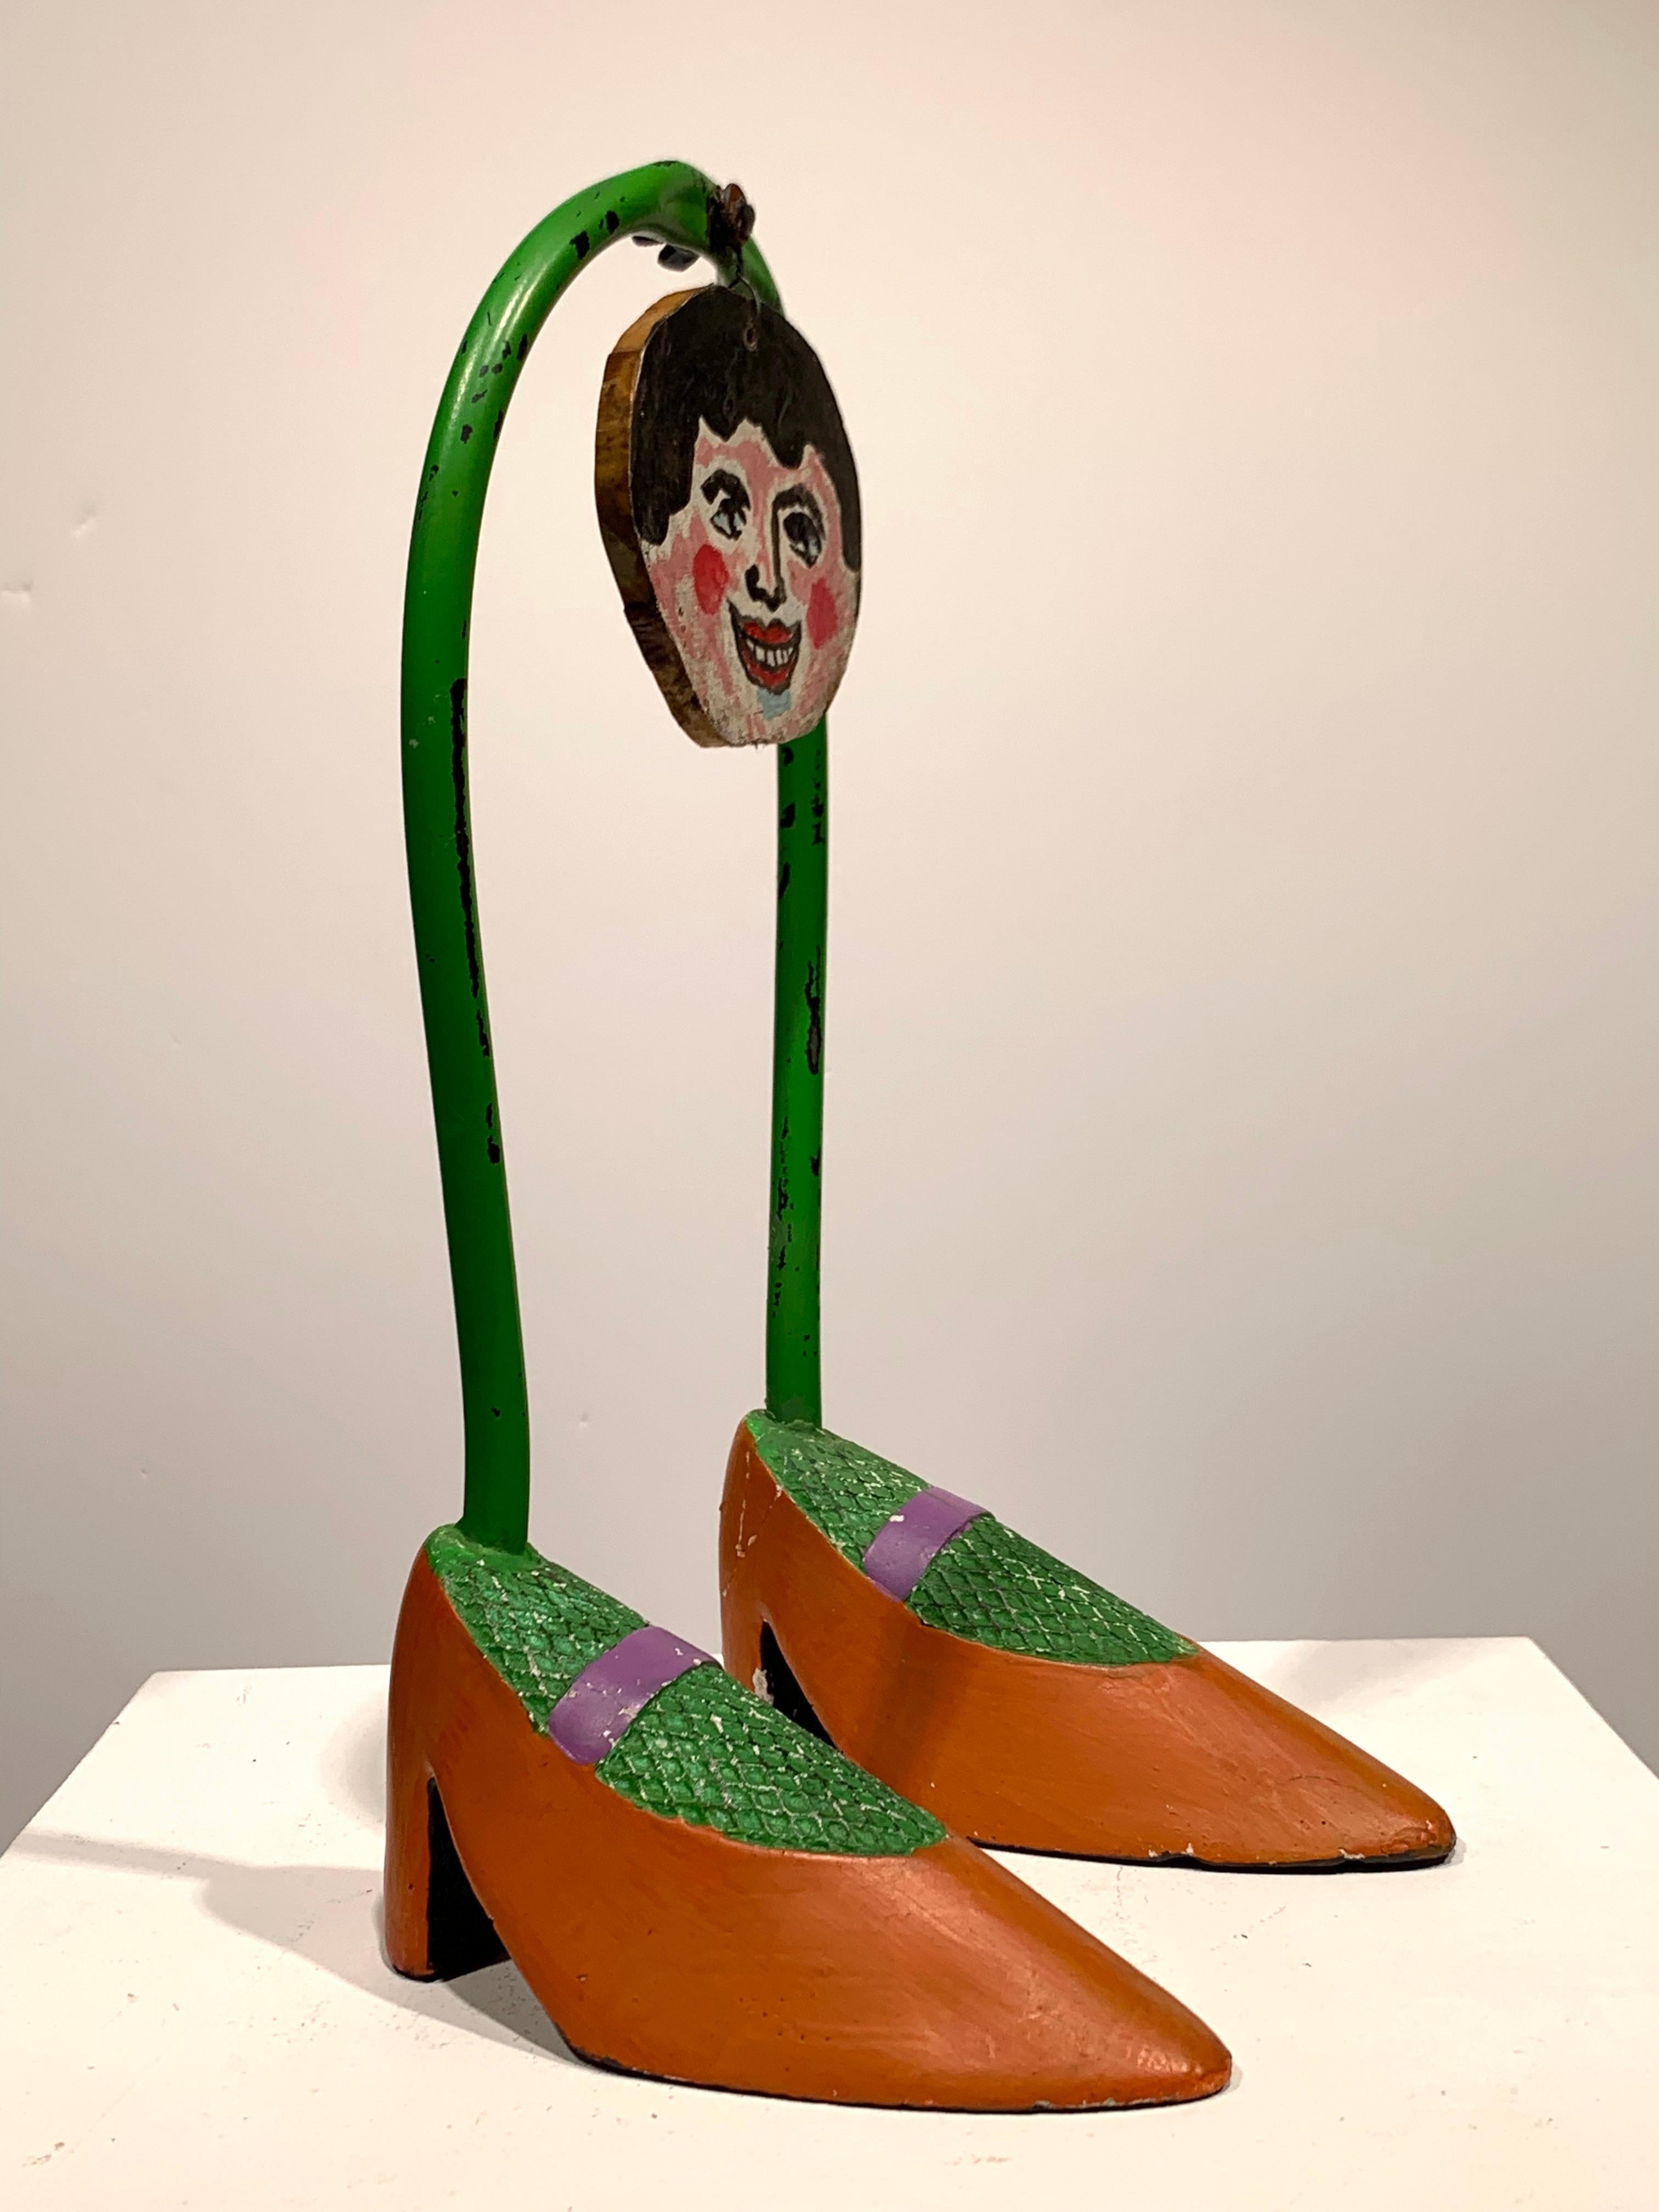 Rocco Monticolo (b. 1931). Untitled, 2022. Found antique object, wood, paint. Signed on reverse of face. 

Monticolo was born in Italy in 1931 and came to America in 1946. He joined the USAF in 1950. He attended the Hussain School of Art in